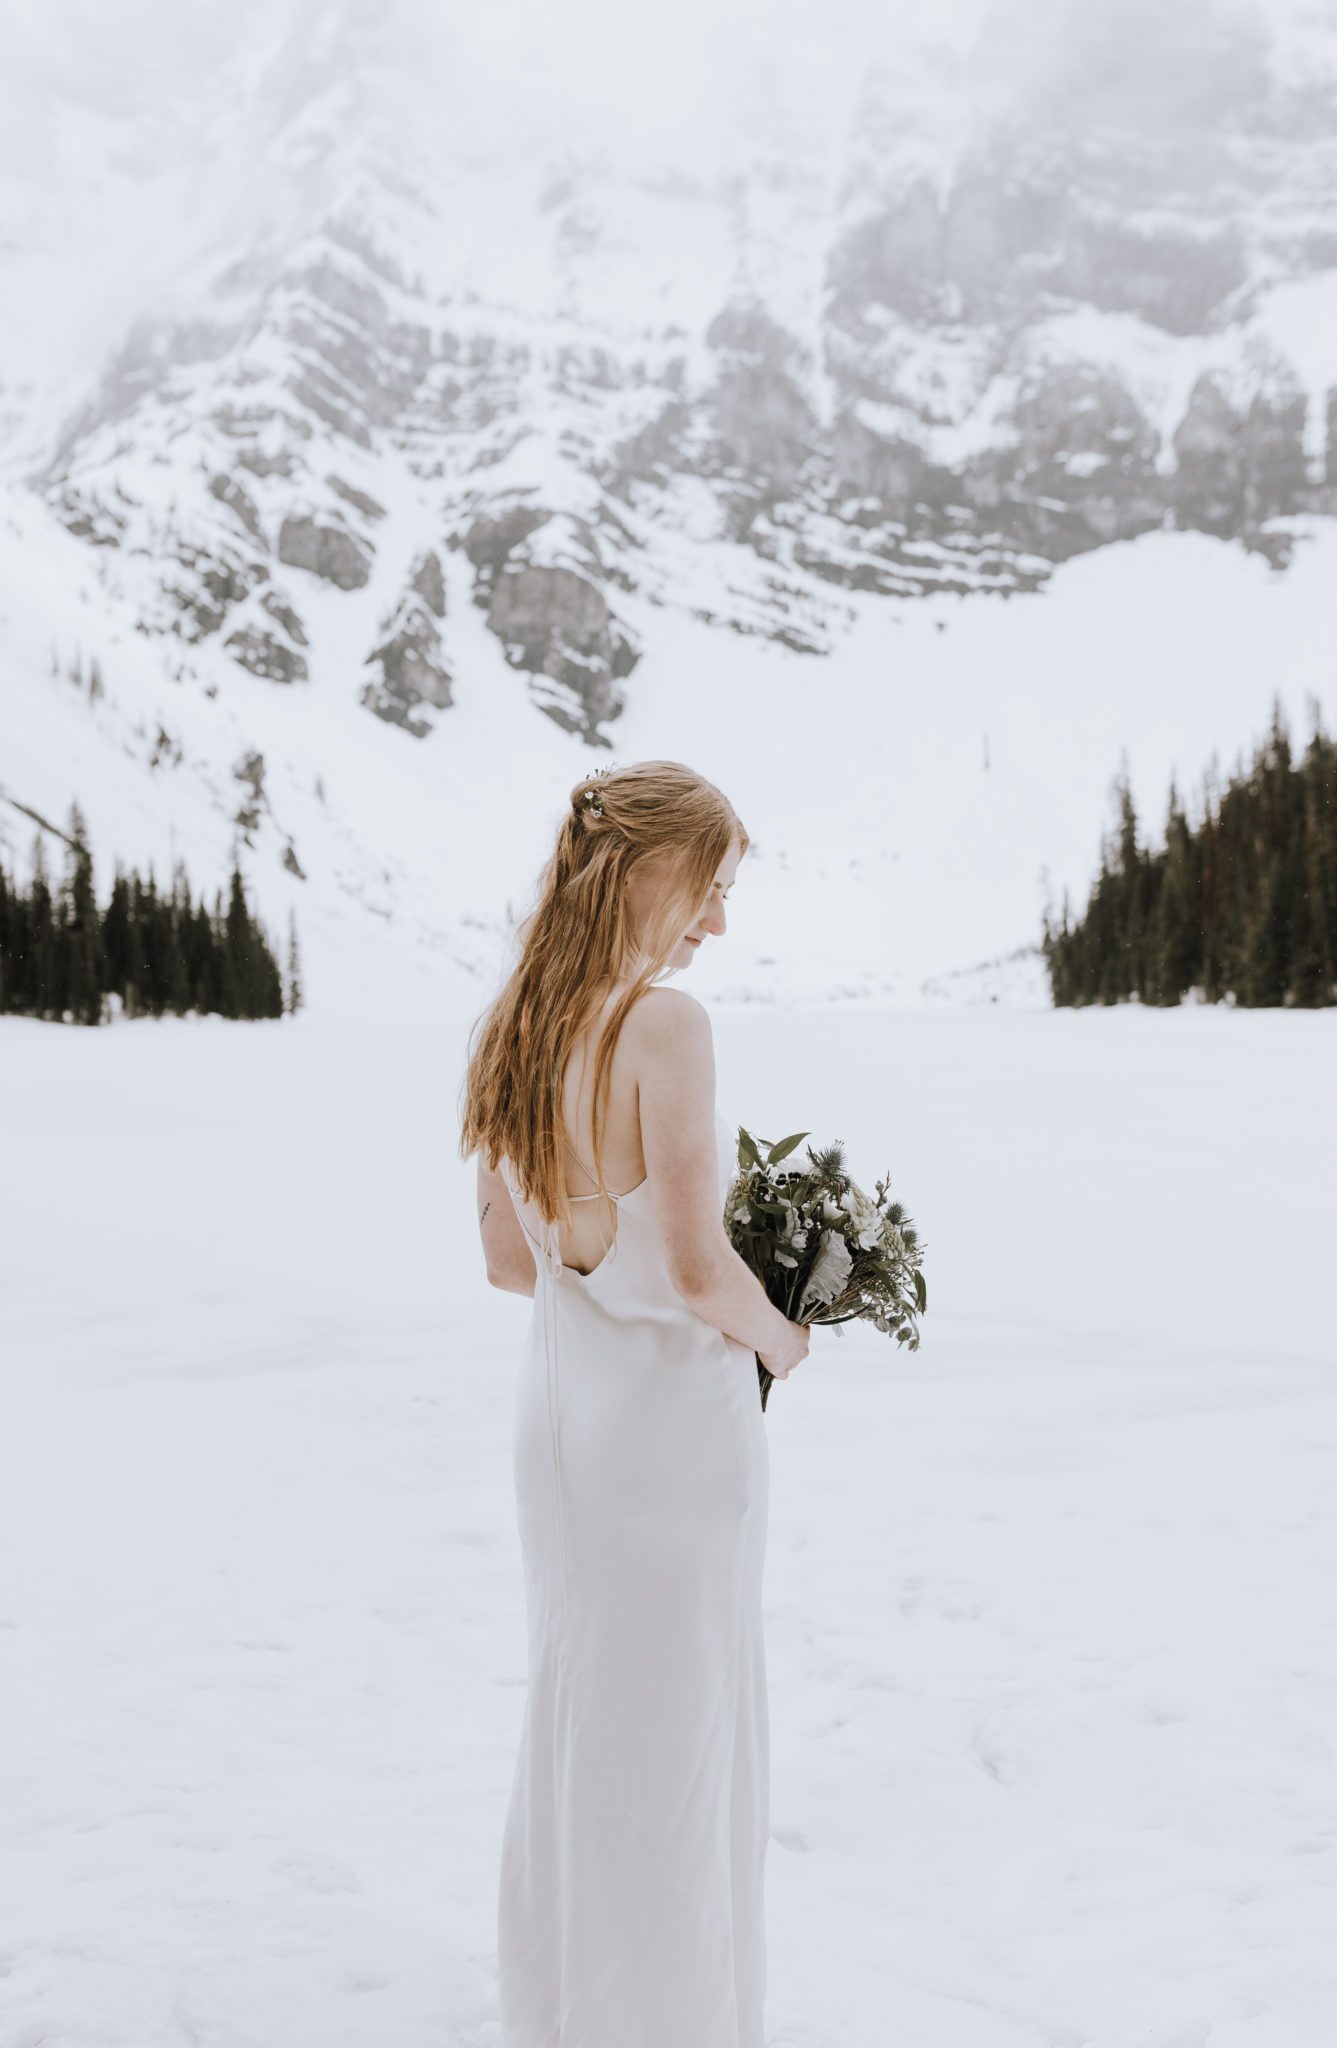 This Nordegg Helicopter Elopement in the Mountains Makes Our Hearts Soar